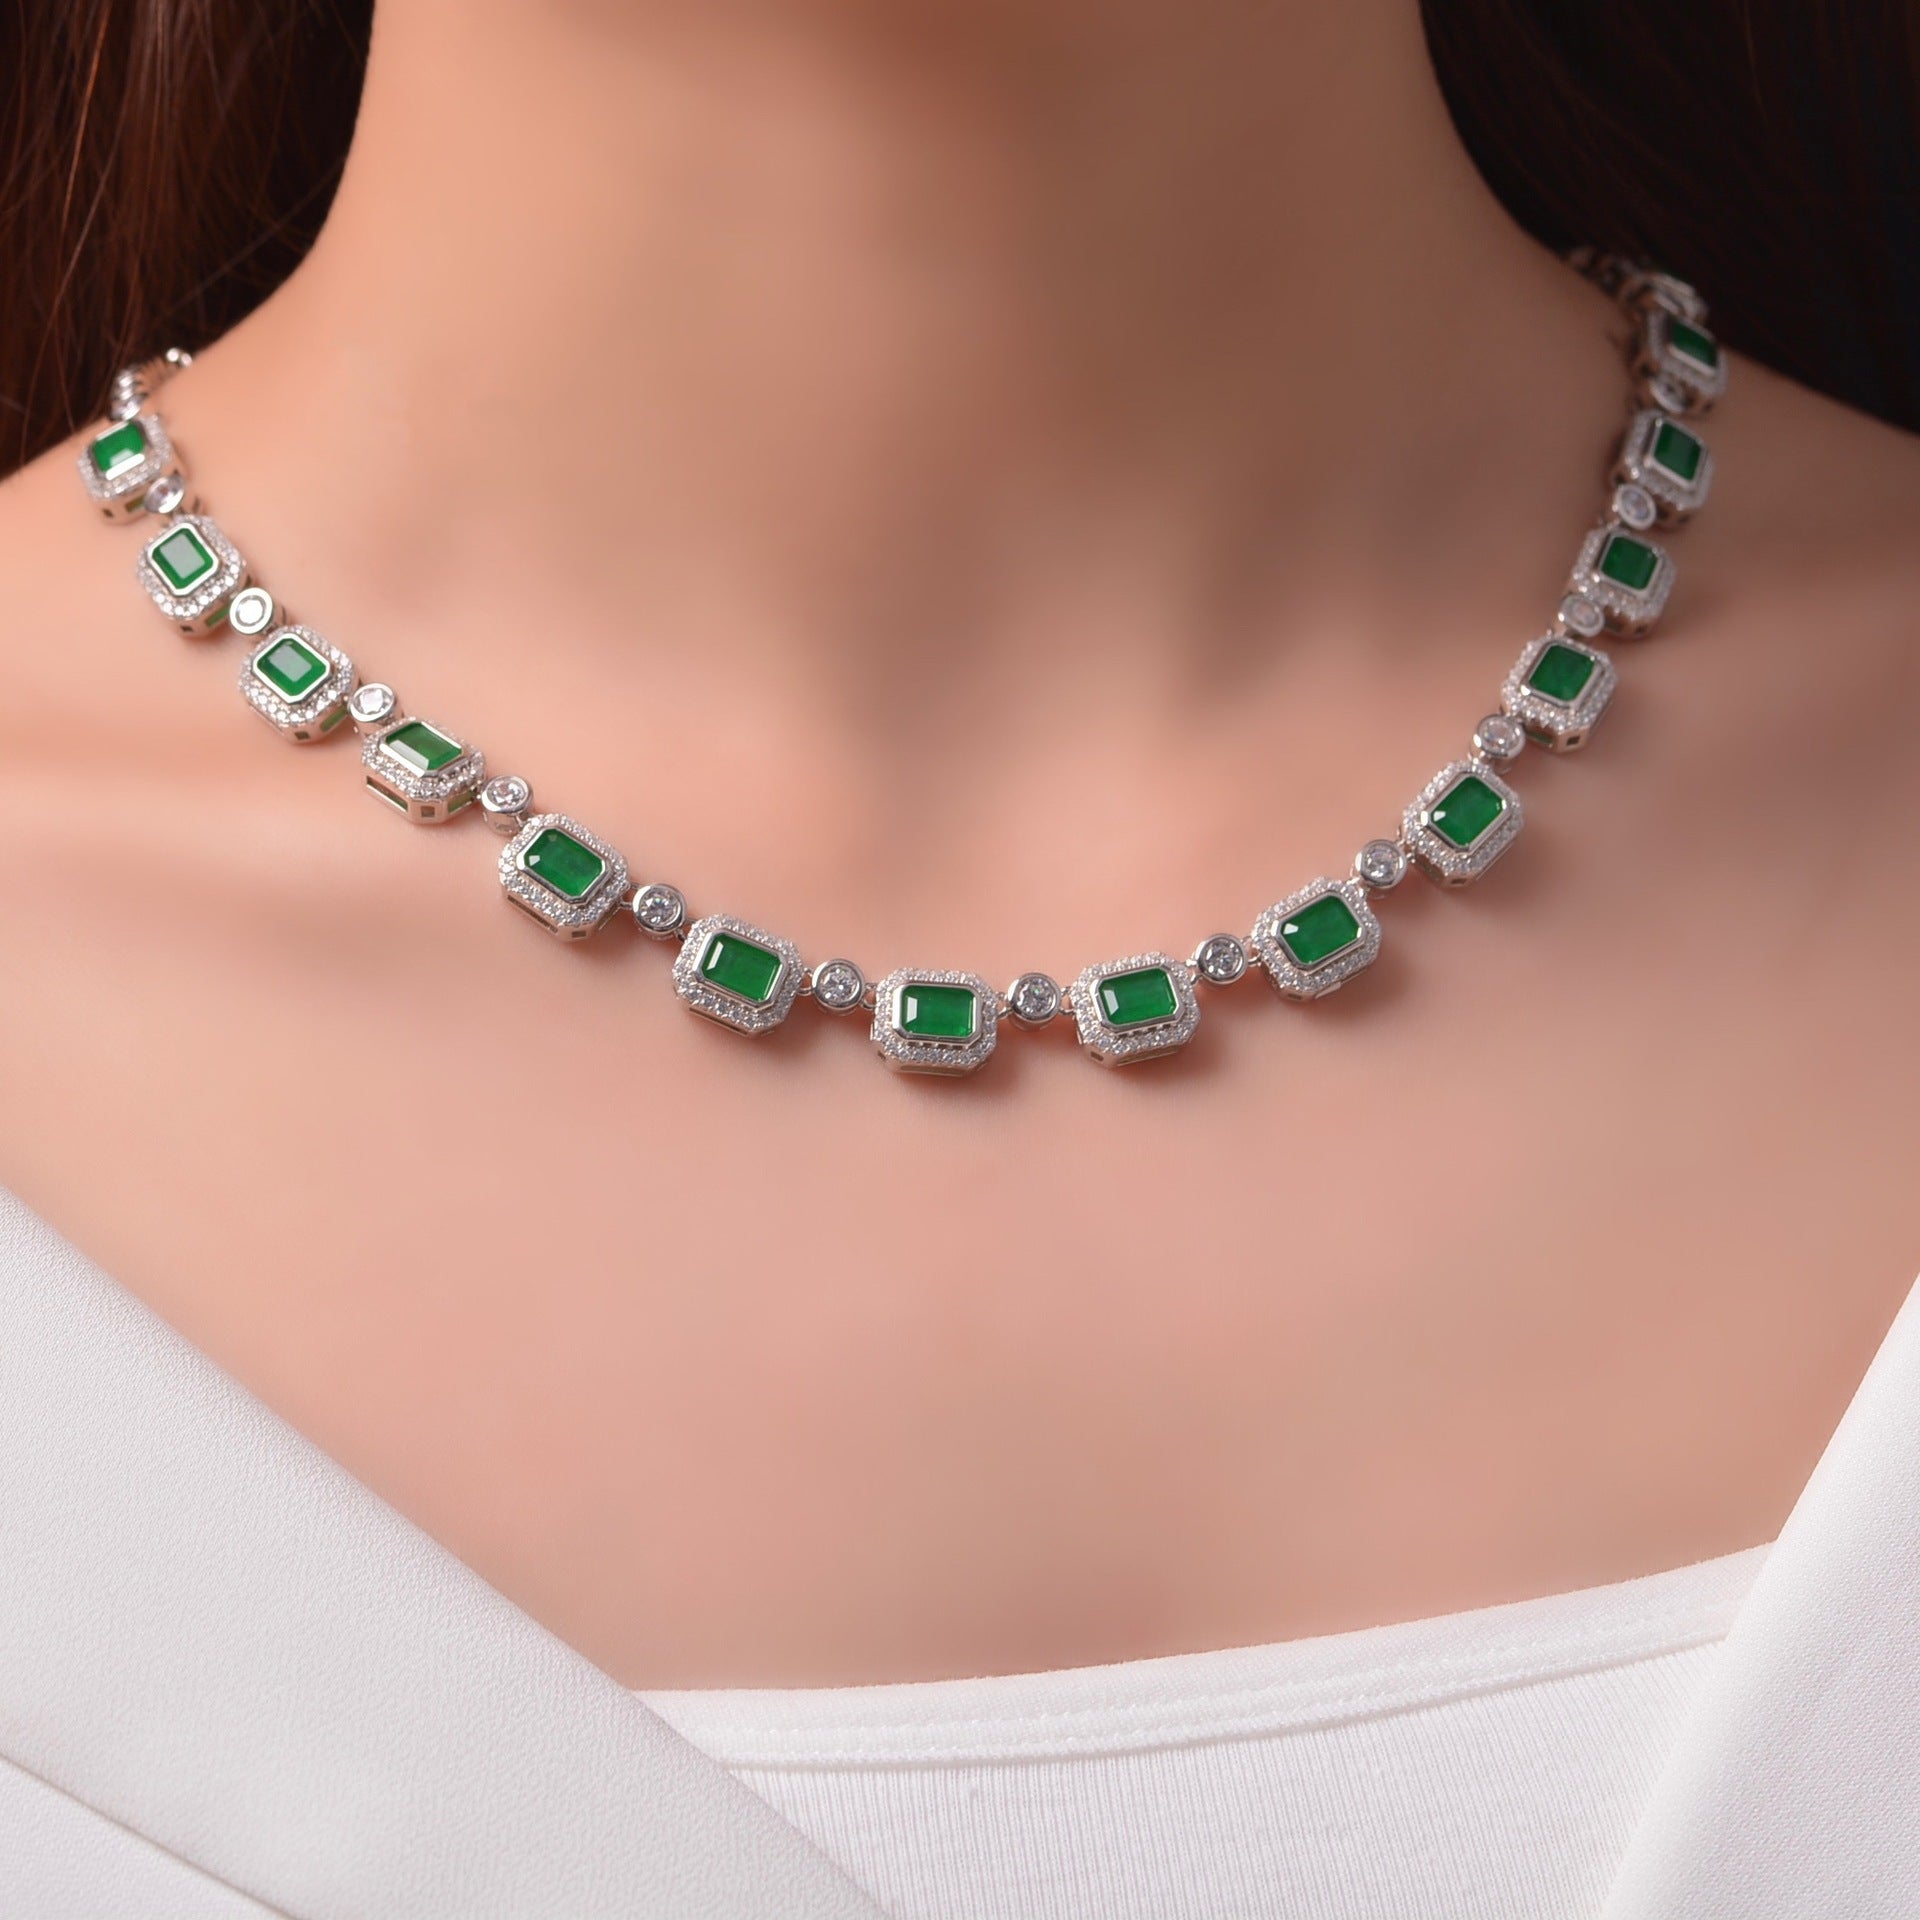 Antique Emerald Necklace - HERS